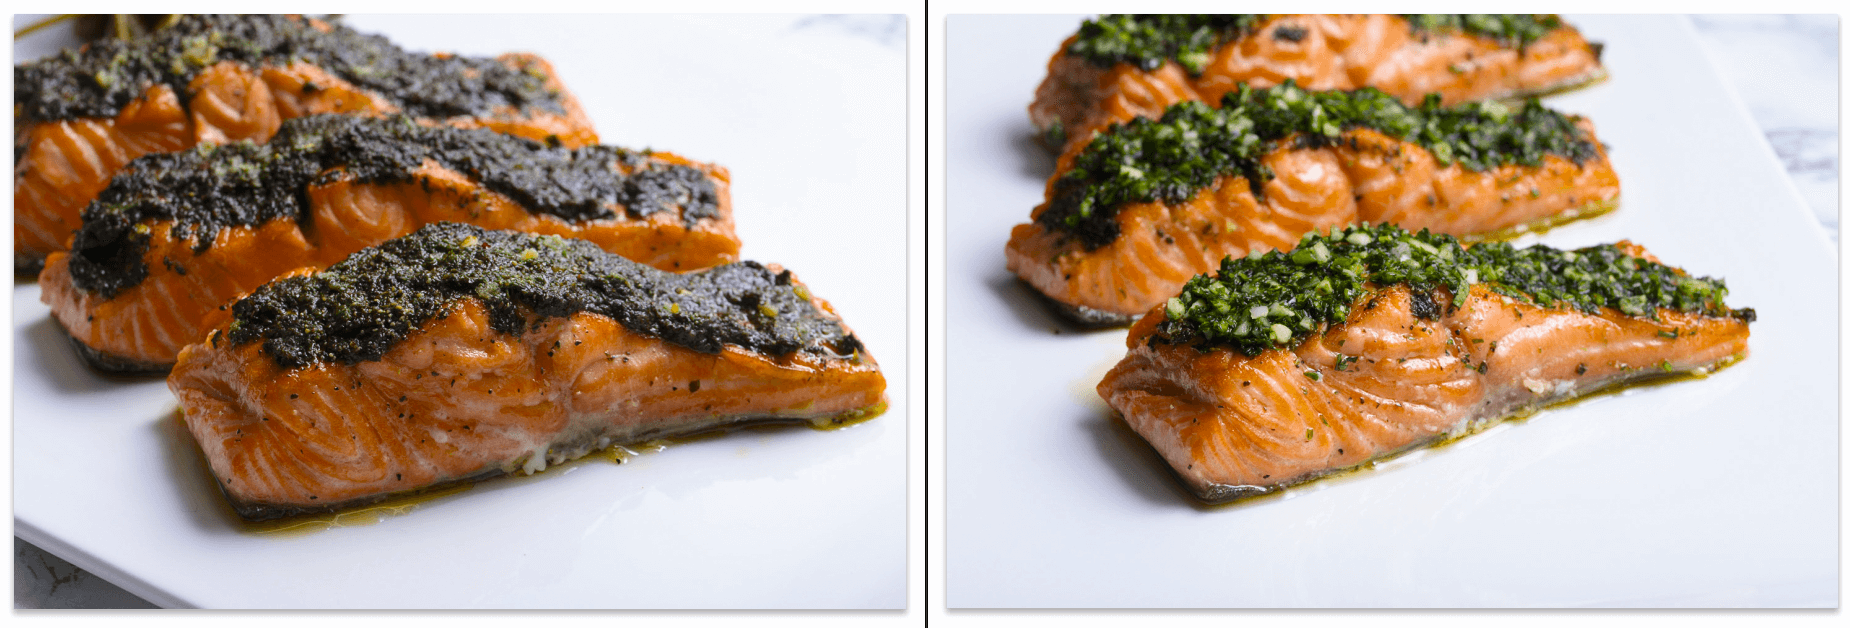 food photography styling makes a big difference to this salmon.